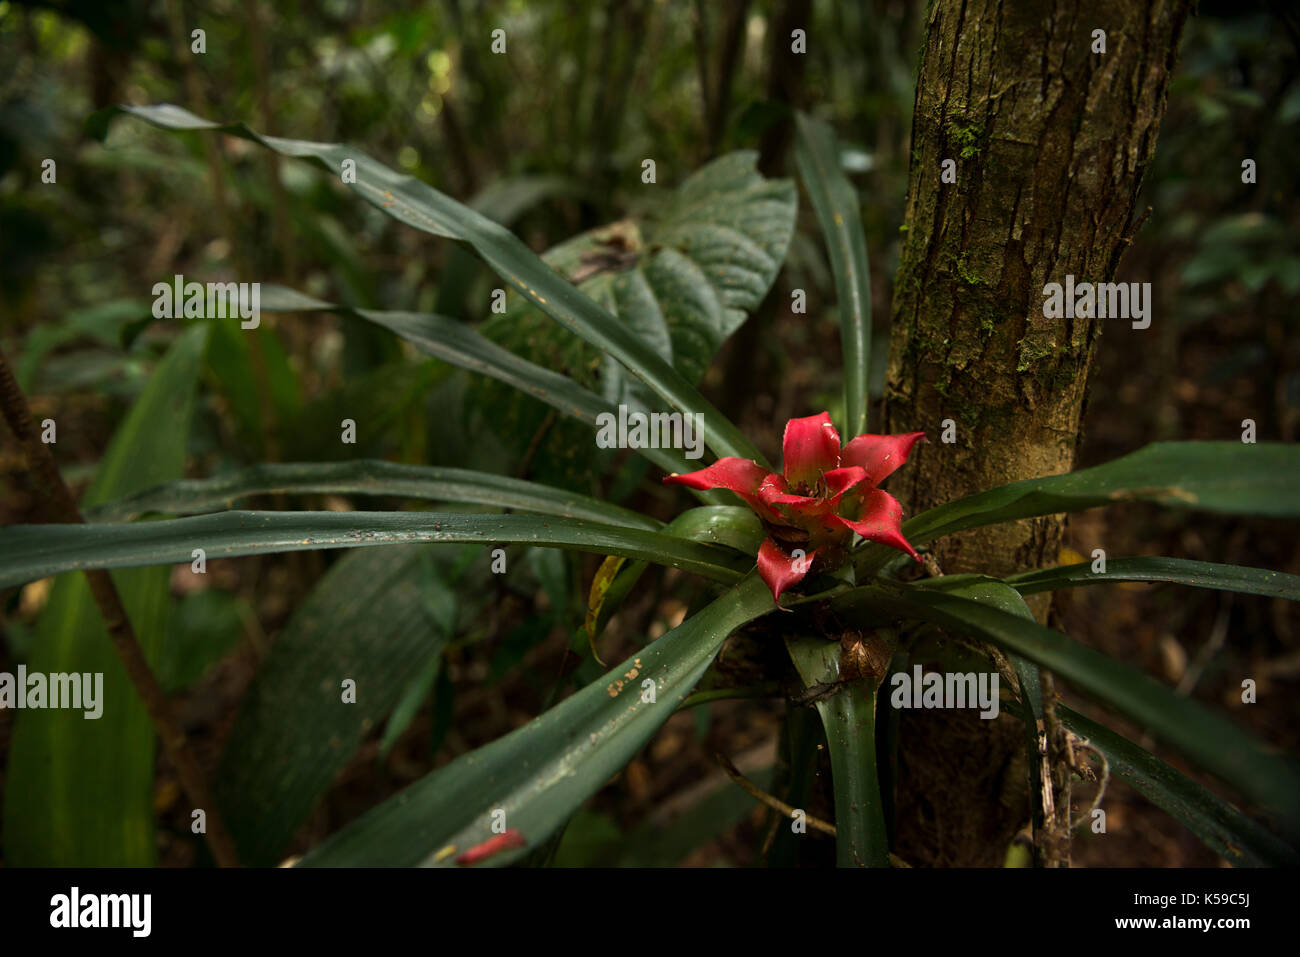 A flowering bromeliad from the Atlantic Rainforest of SE Brazil Stock Photo